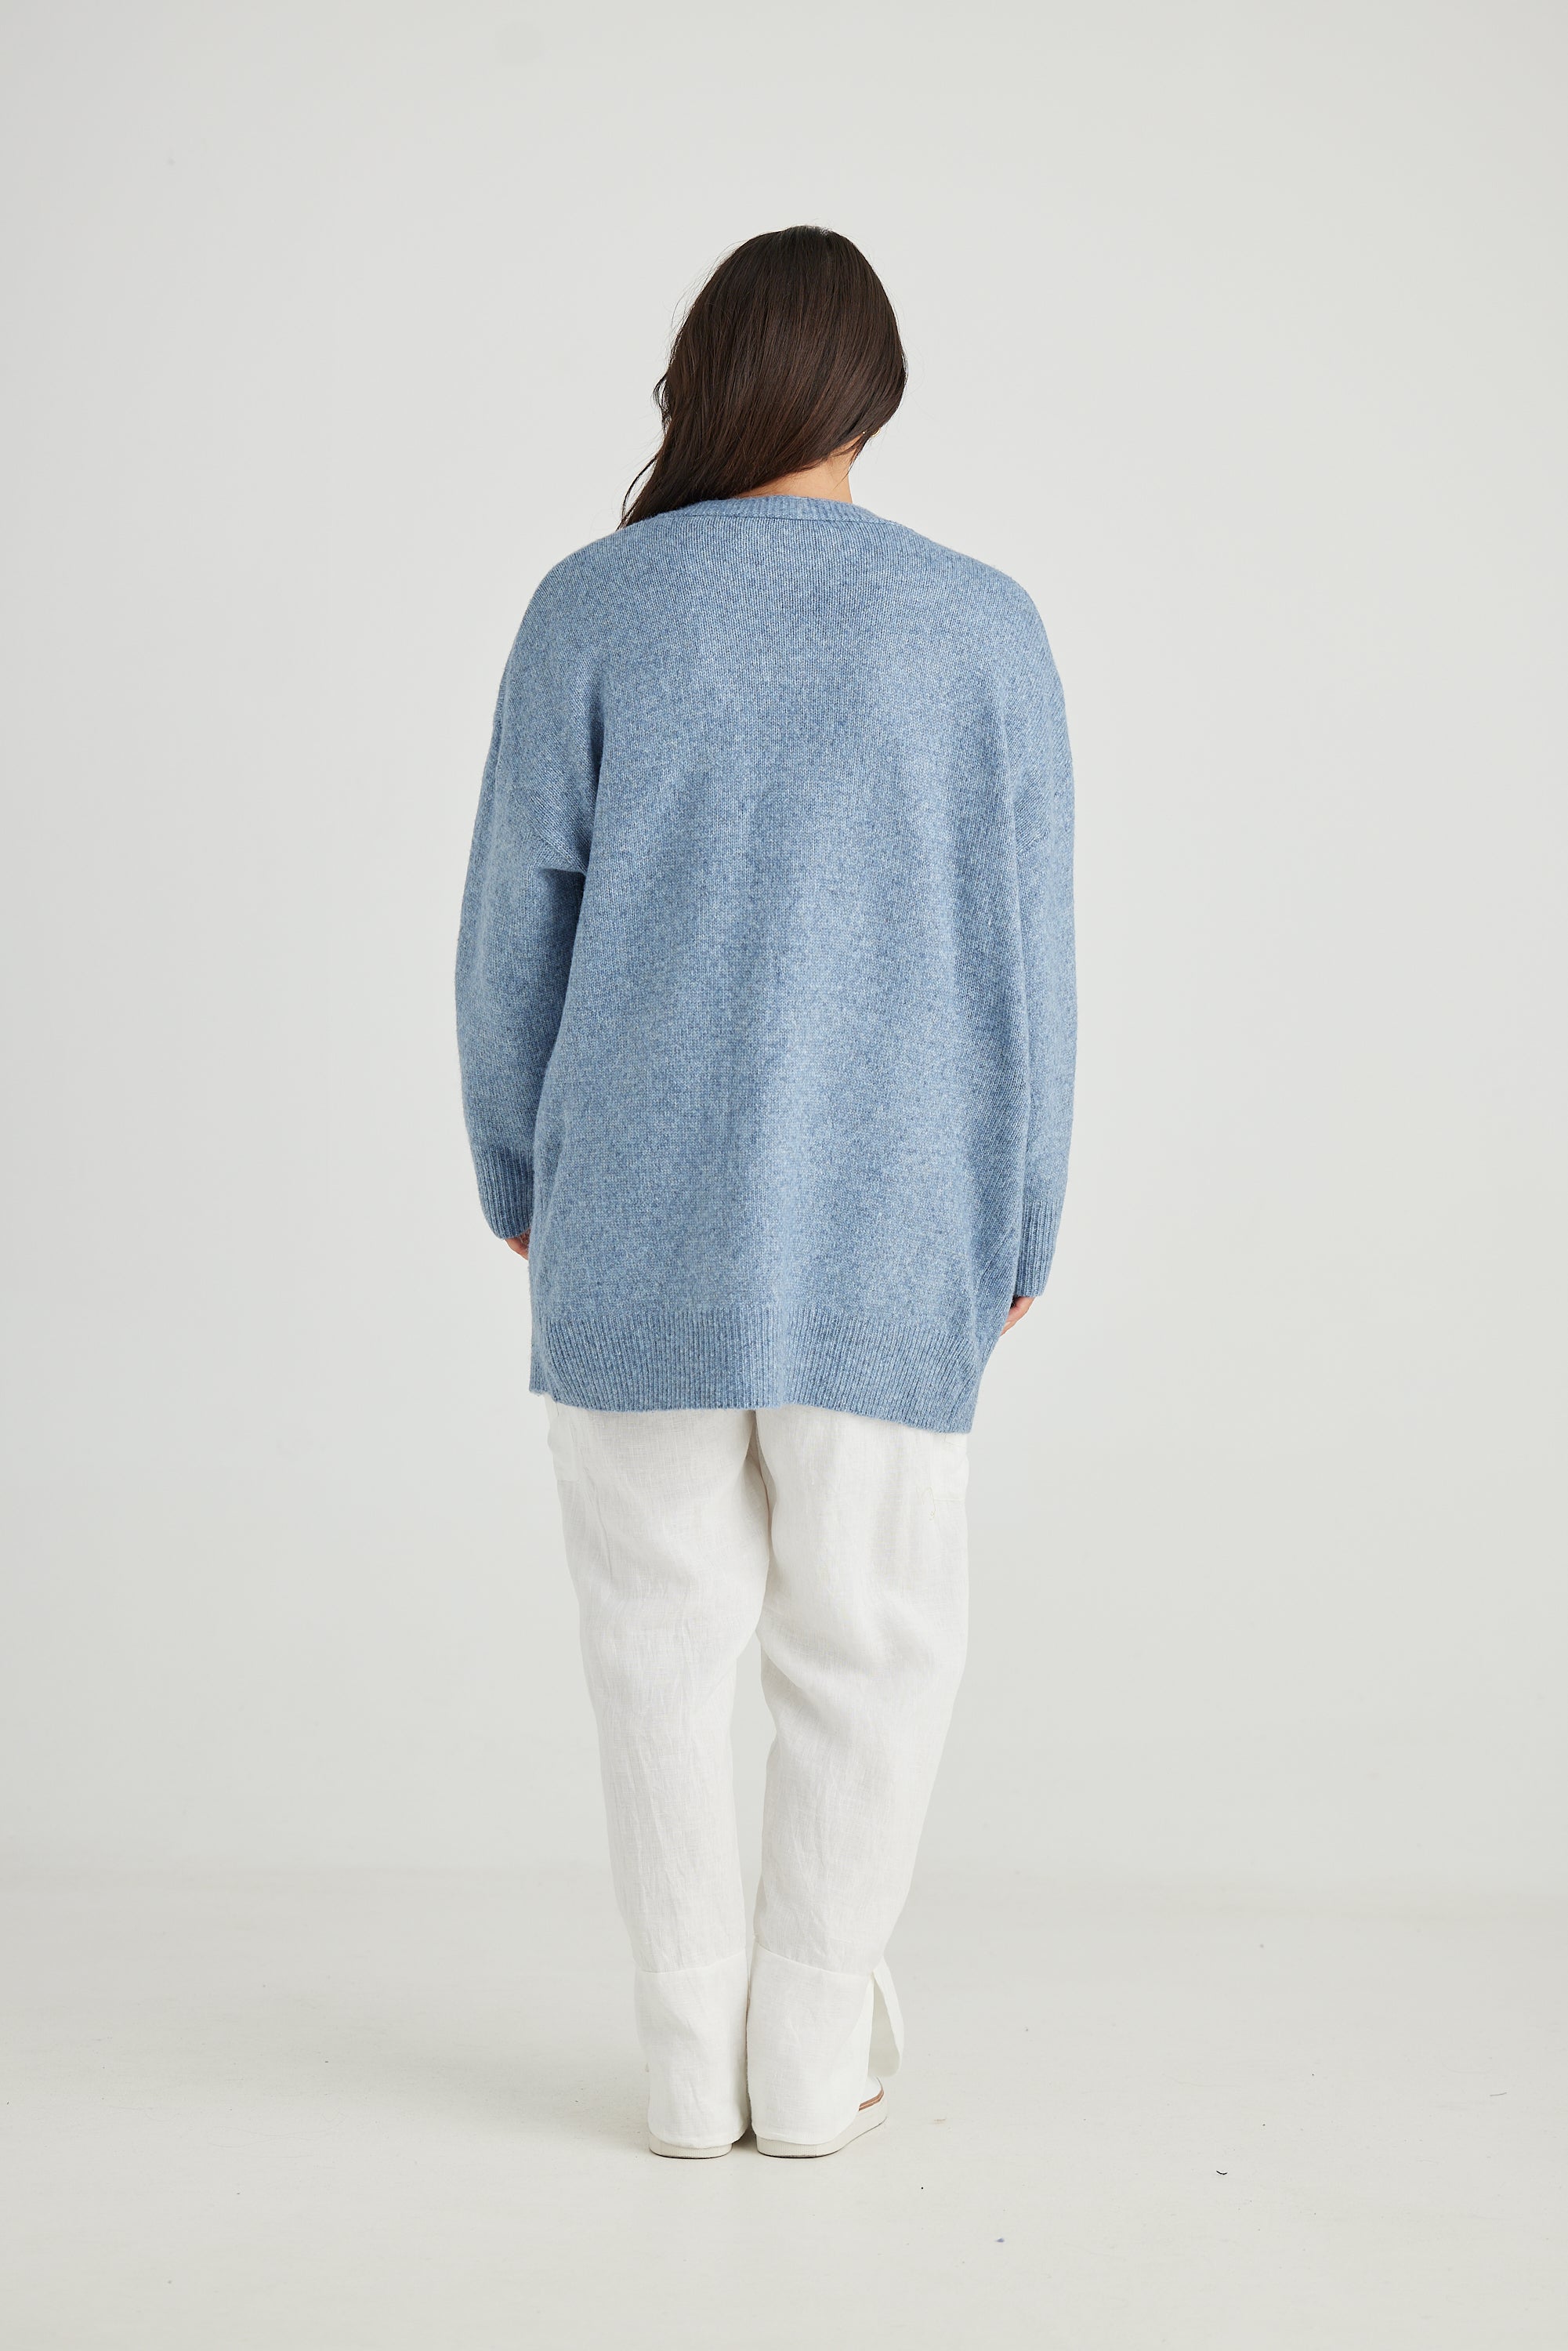 On Deck Cardi - Lake Blue-Knitwear & Jumpers-Holiday-The Bay Room